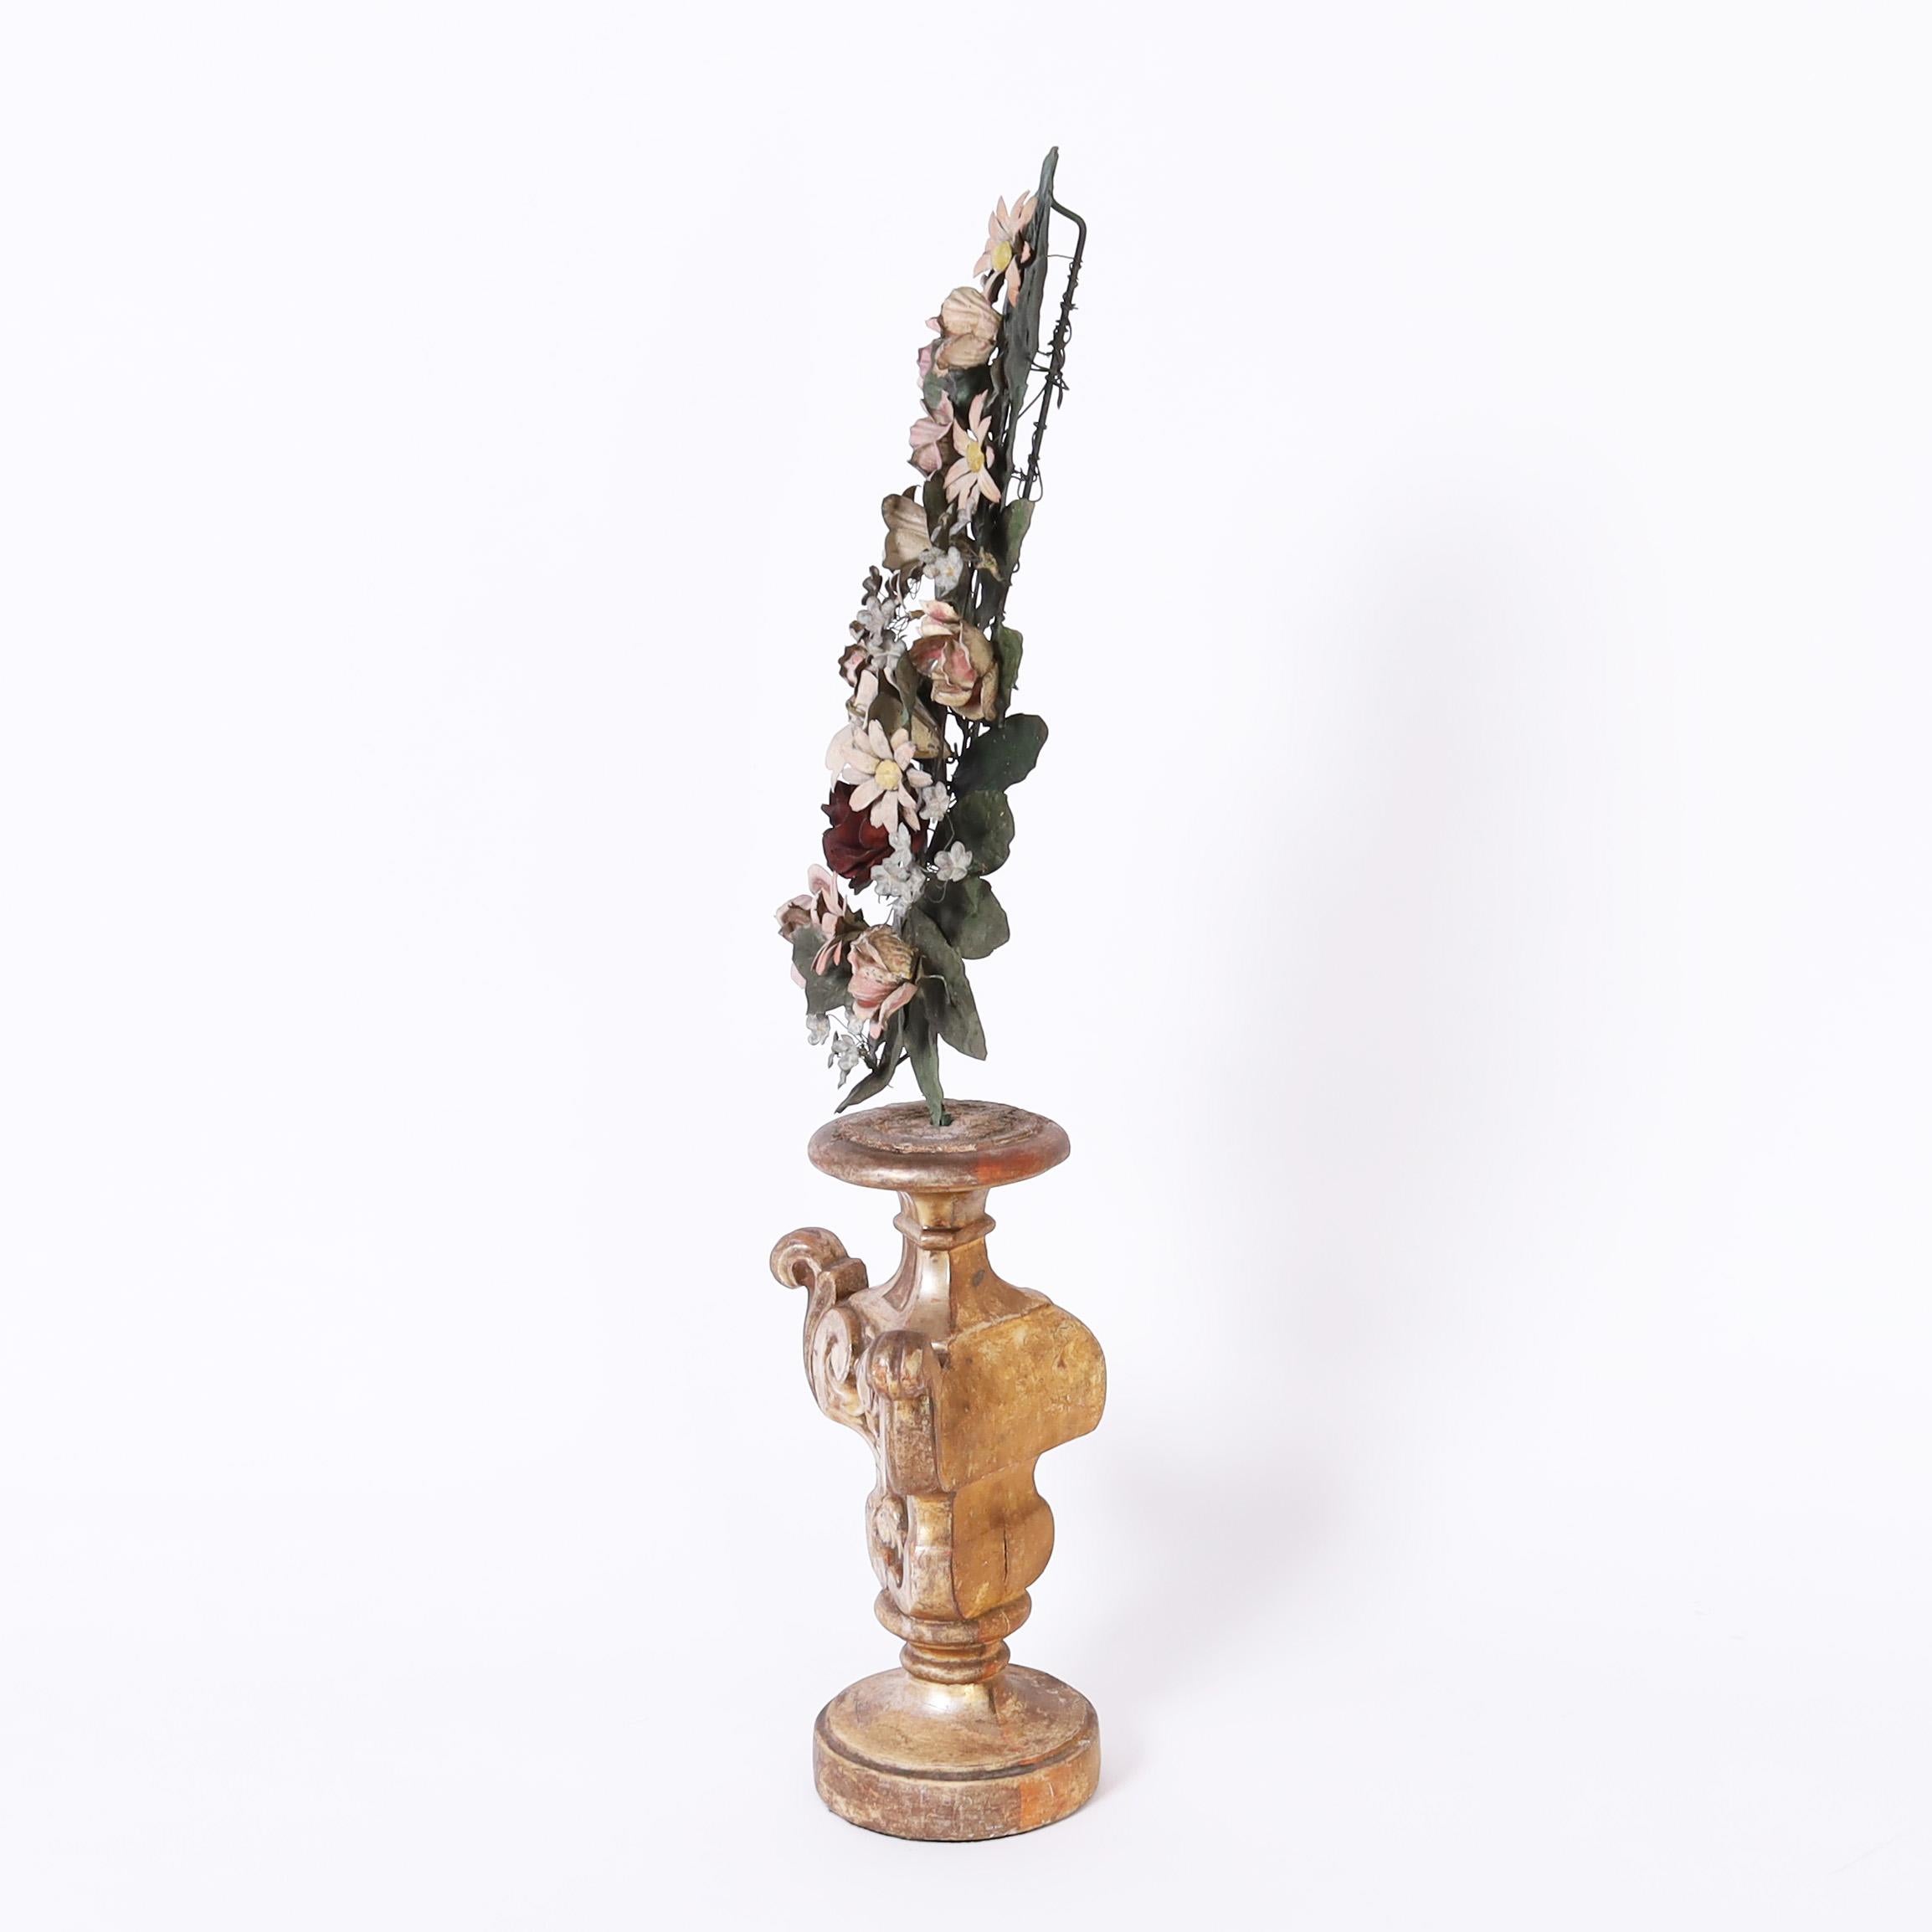 19th Century Italian carved wood remnant with classical form and a worn silver leaf finish holding a tole bouquet with flowers and leaves with a perfect time worn patina.